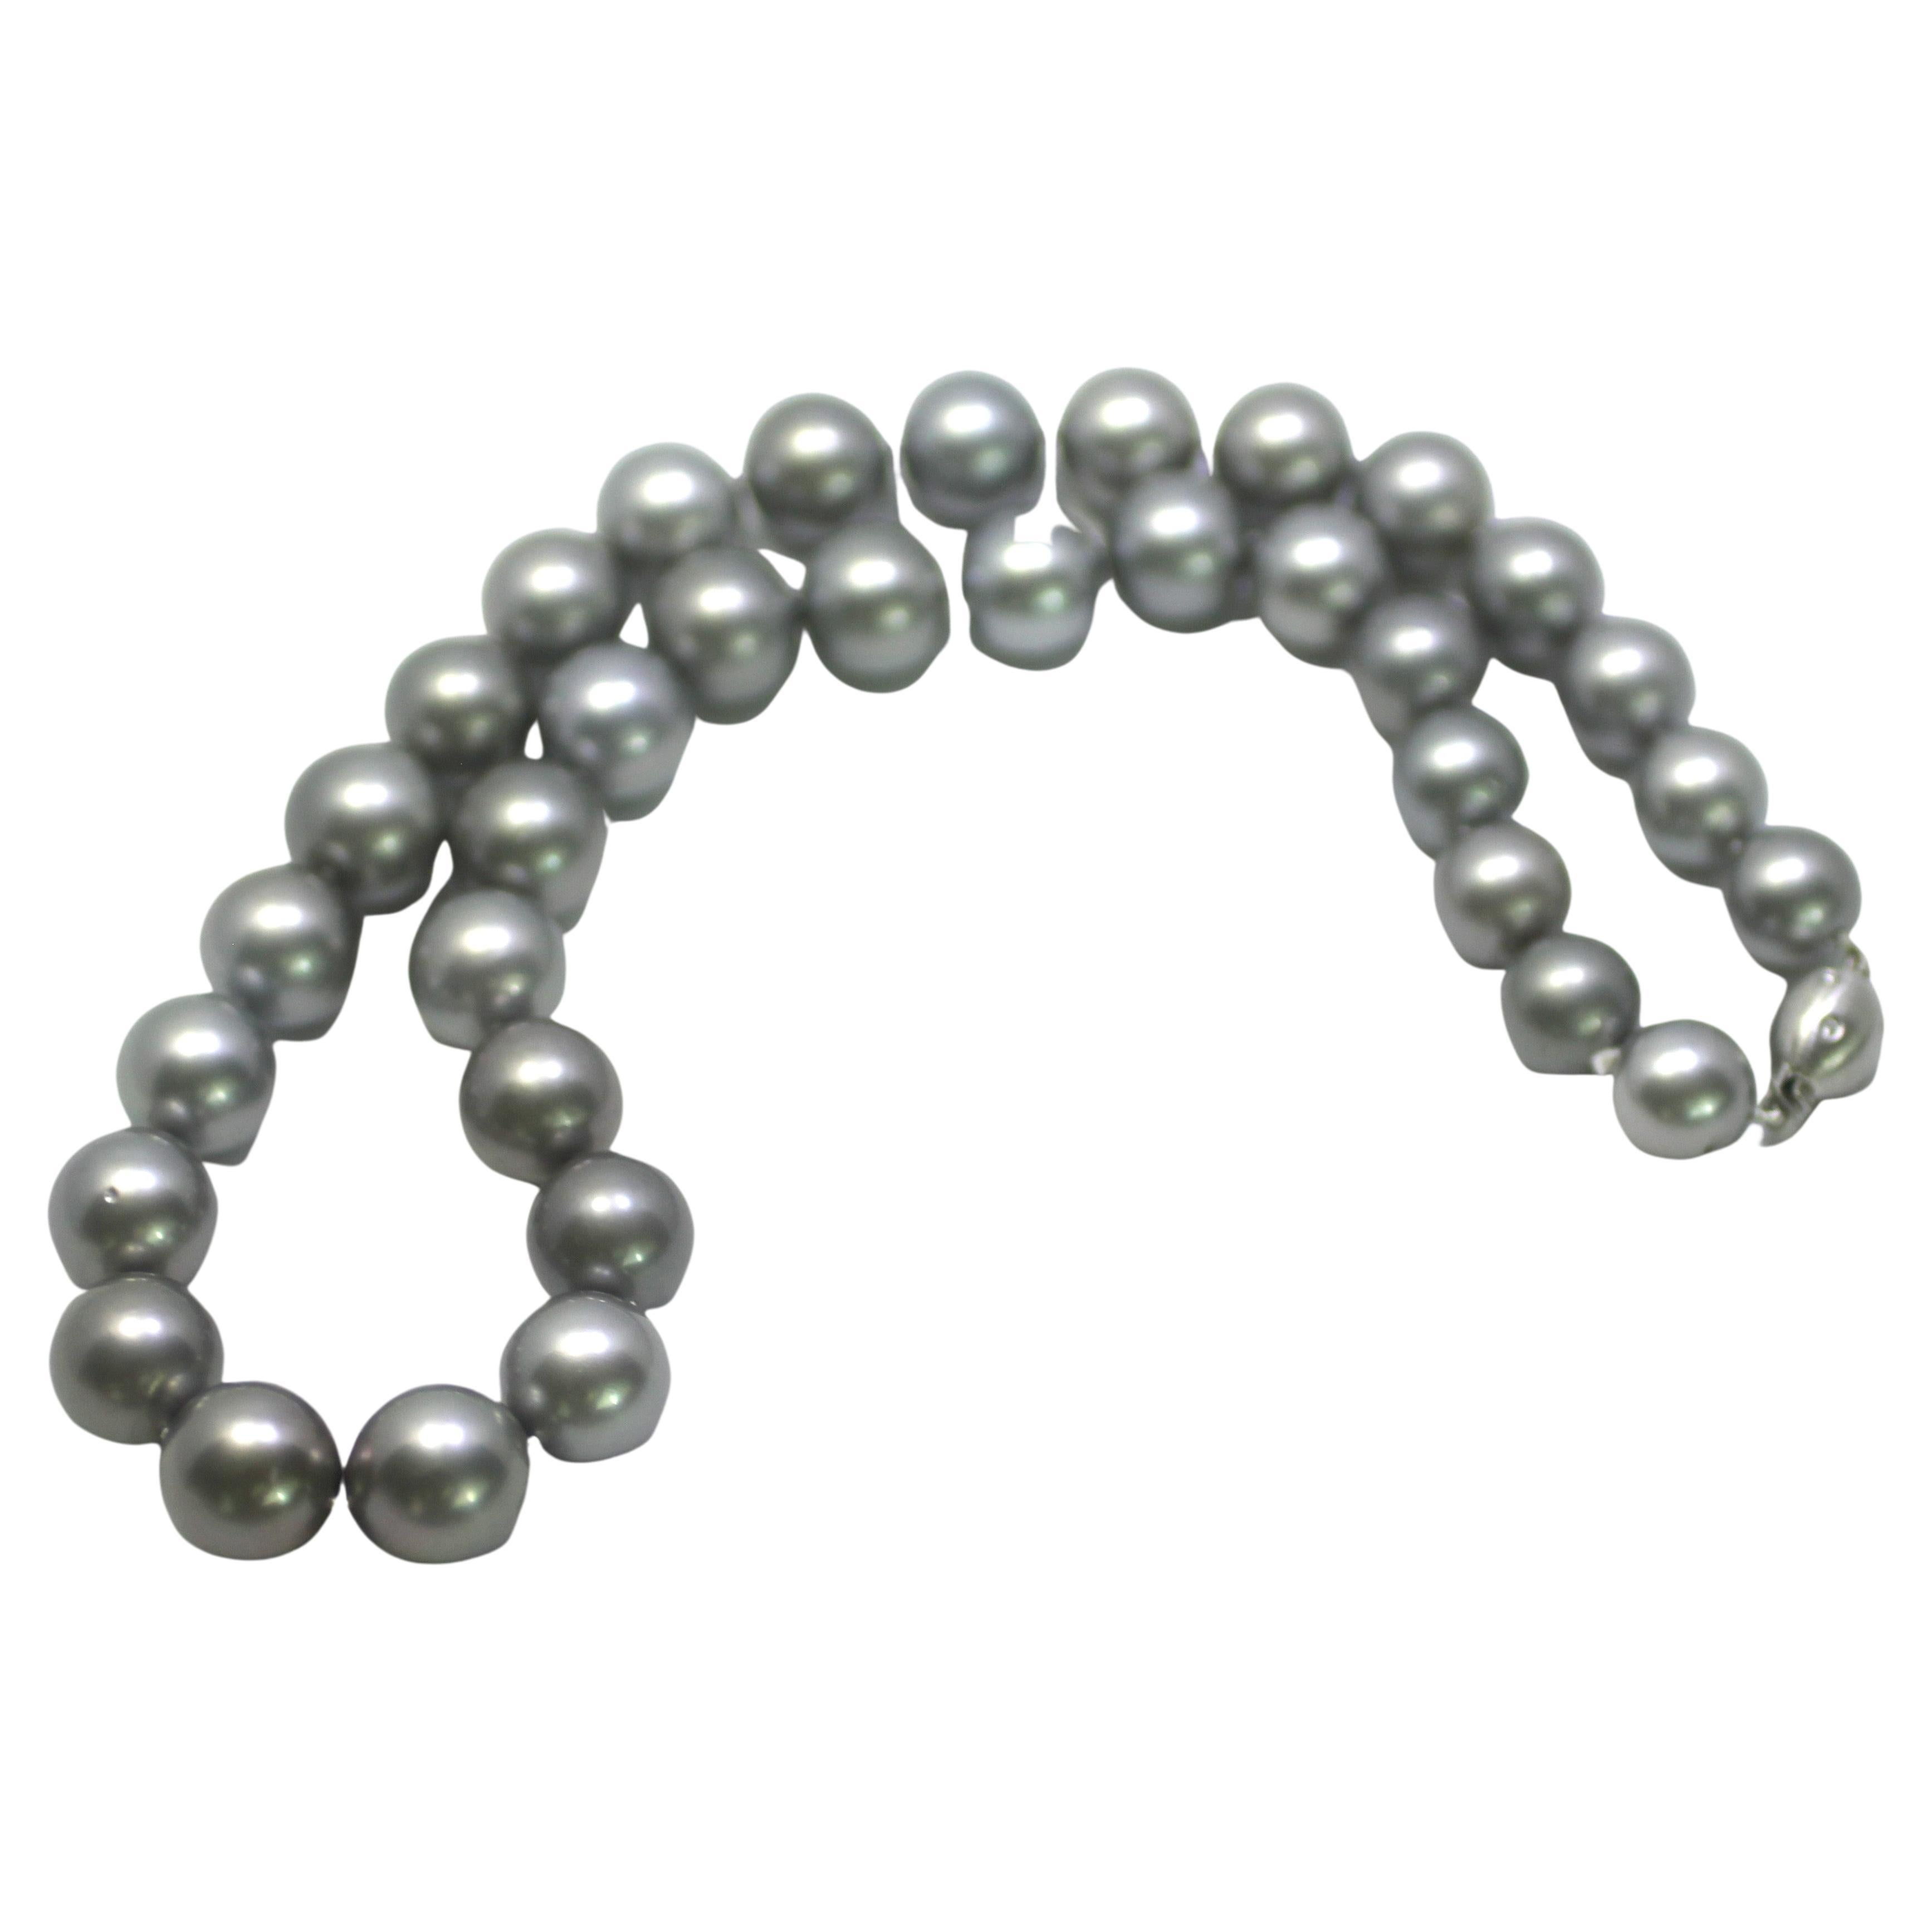 Hakimoto By Jewel Of Ocean 18K Tahitian South Sea Pearl Strand Necklace
18K White Gold With Diamonds Clasp  
Weight (g): 119
Cultured Tahitian South Sea Pearl 
Pearl Size: 12X14.7mm 
Pearl Shape: Round 
Body color: Silver
Orient: Very Good
Luster: